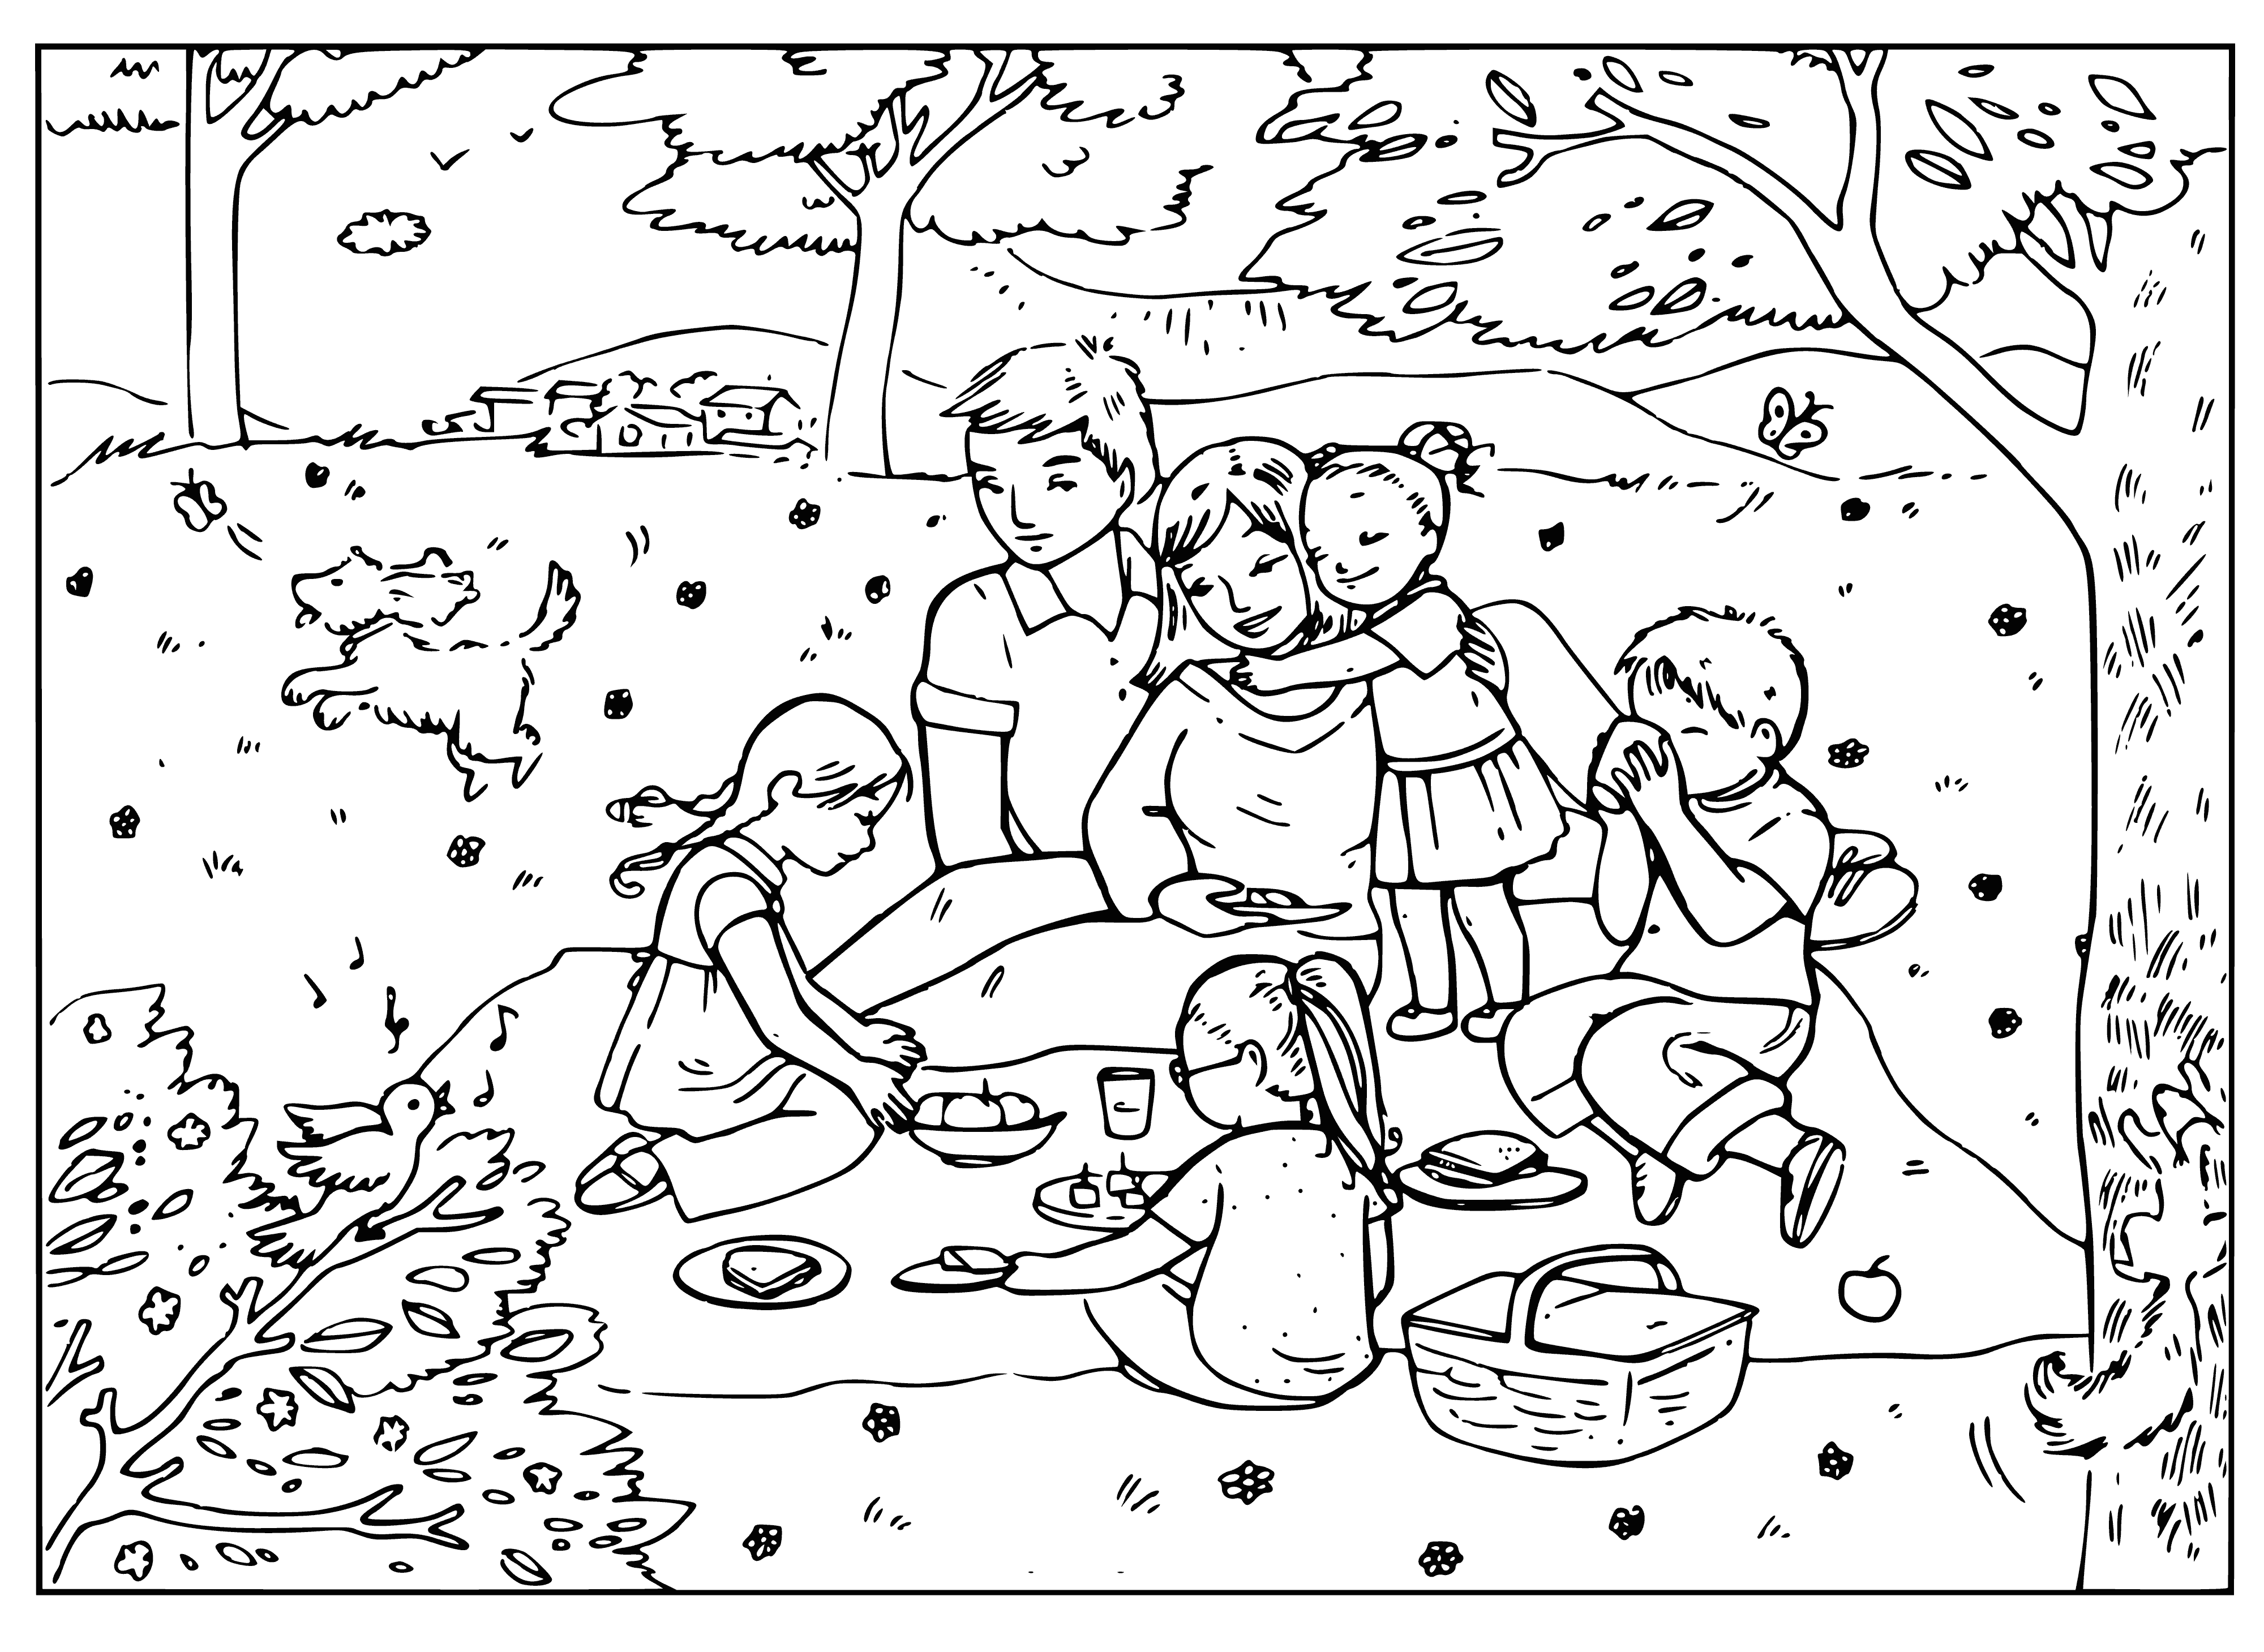 coloring page: Family packing a picnic basket of sandwich, WM, grapes & apple. Mom cuddles baby on checkered blanket.